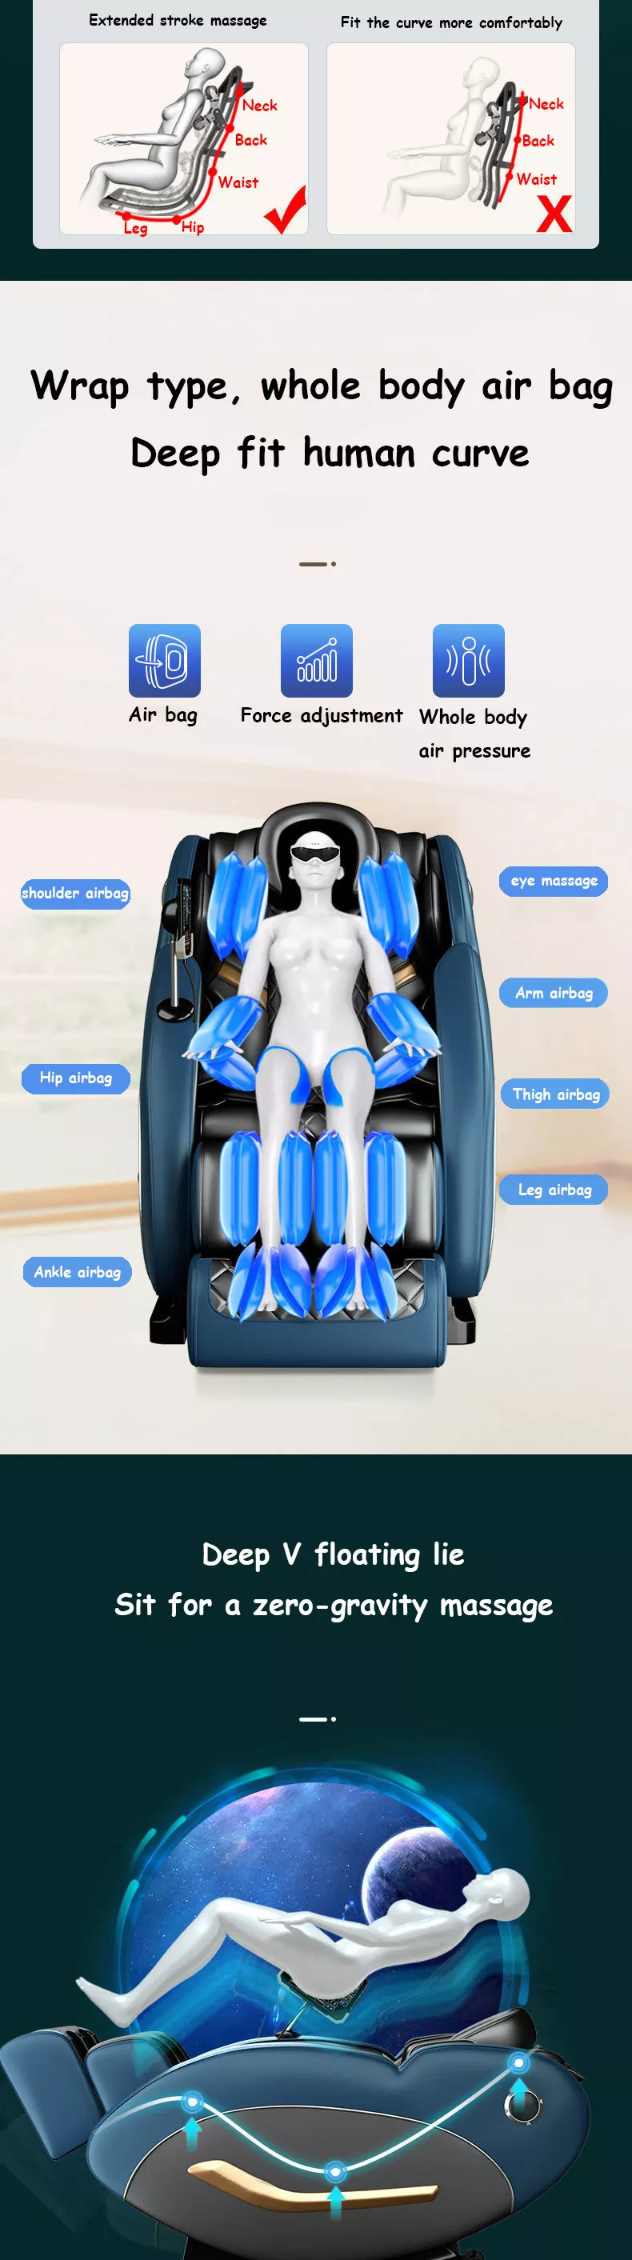 massage chair factory.png